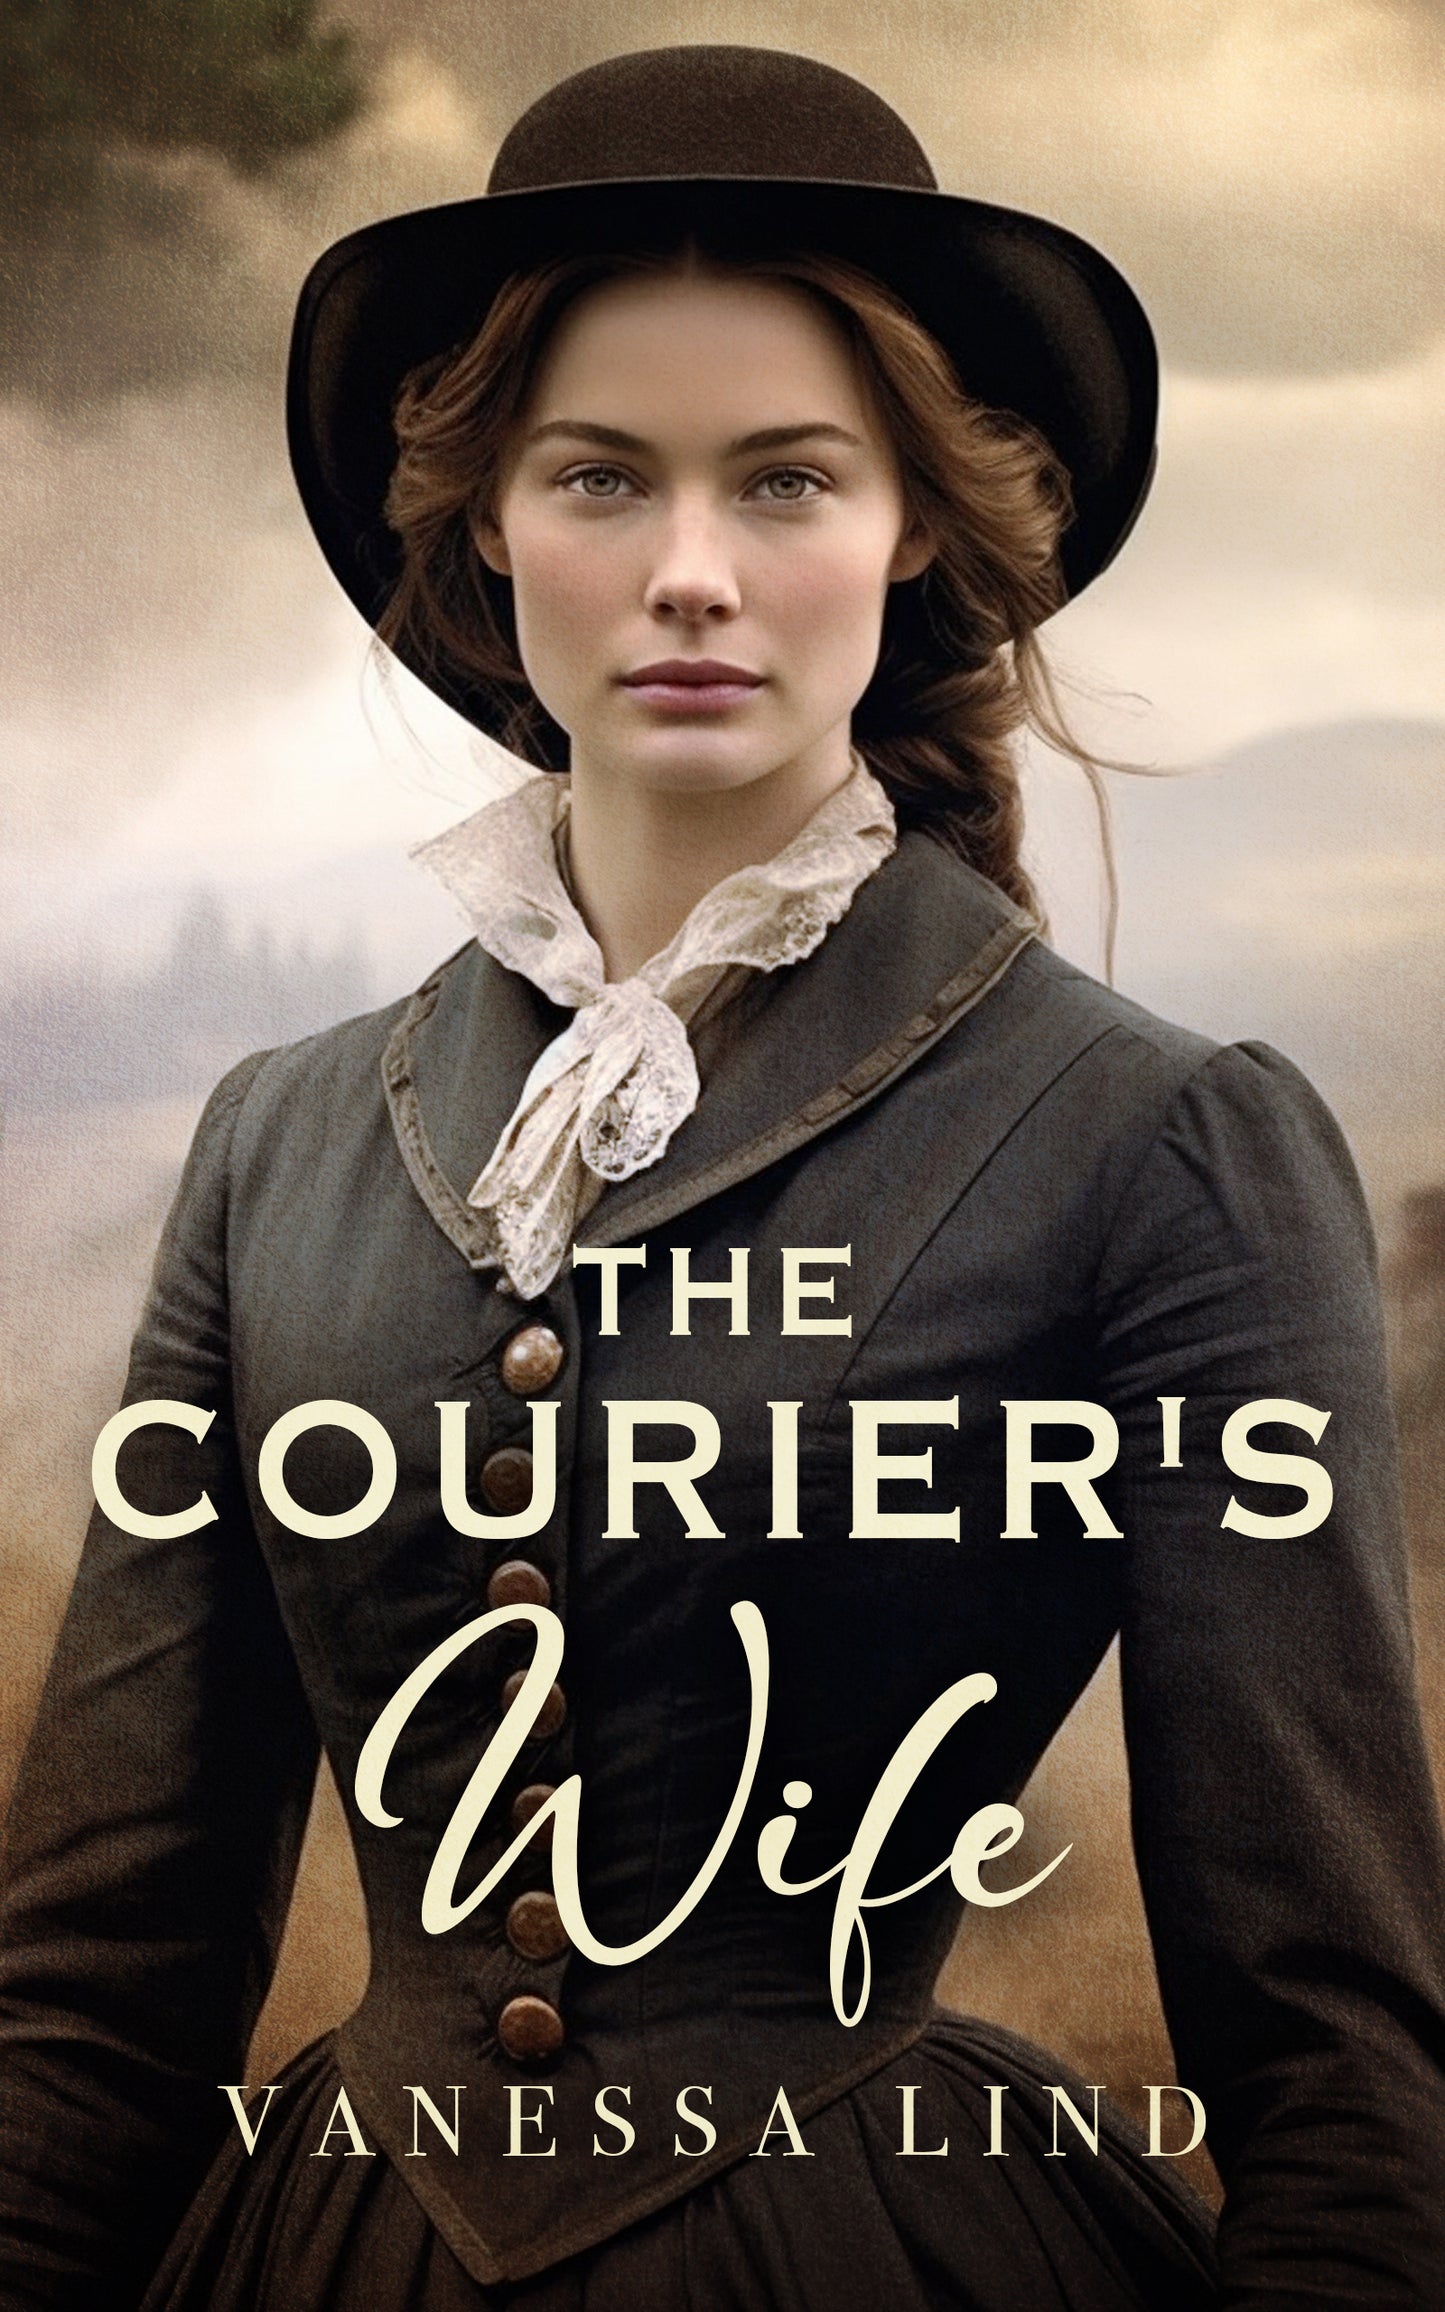 The Courier's Wife: A Captivating Novel of Courage and Resilience (Secrets of the Blue and Gray Book 1) | eBook